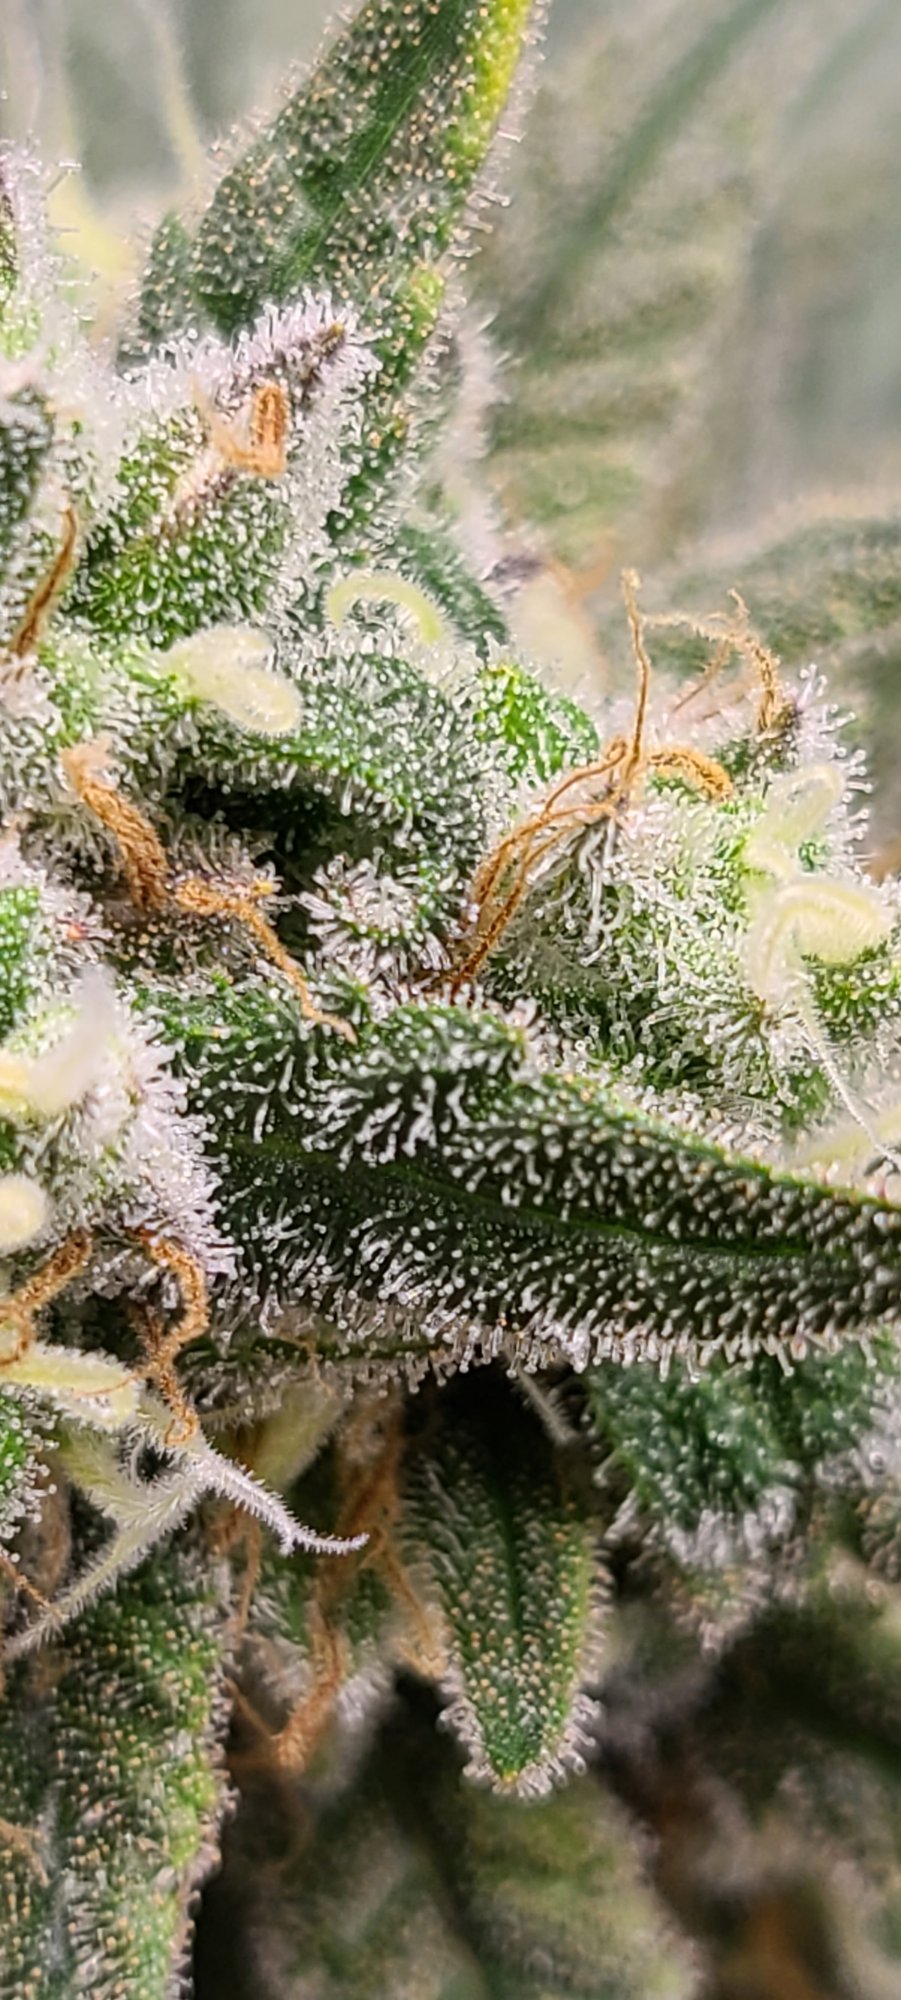 Harvest help for a newbie please 4